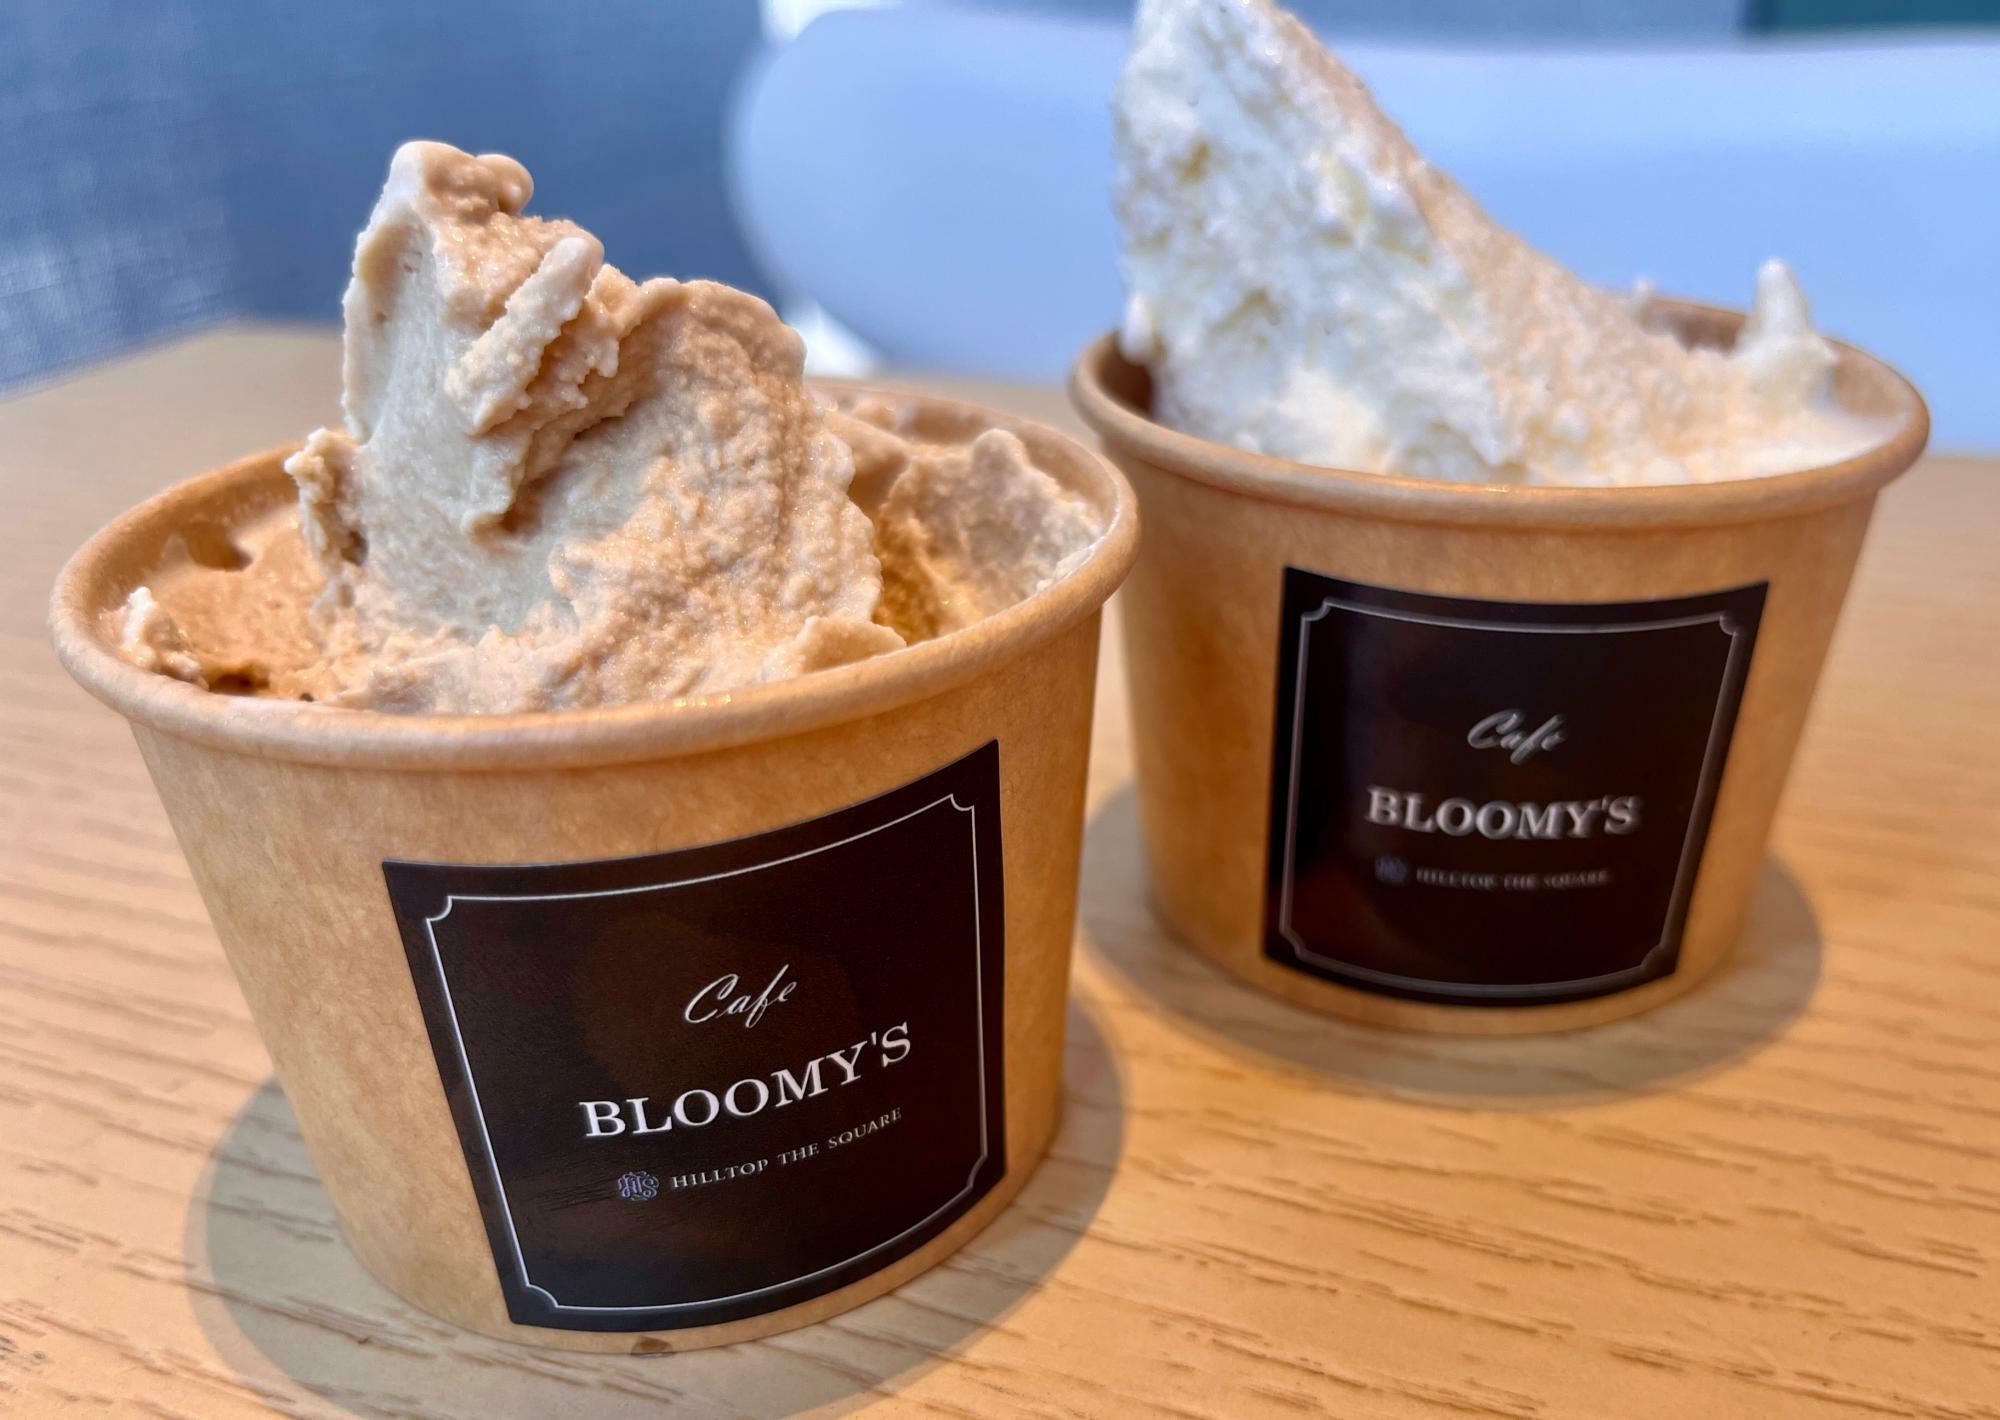 Cafe BLOOMY’S ジェラート